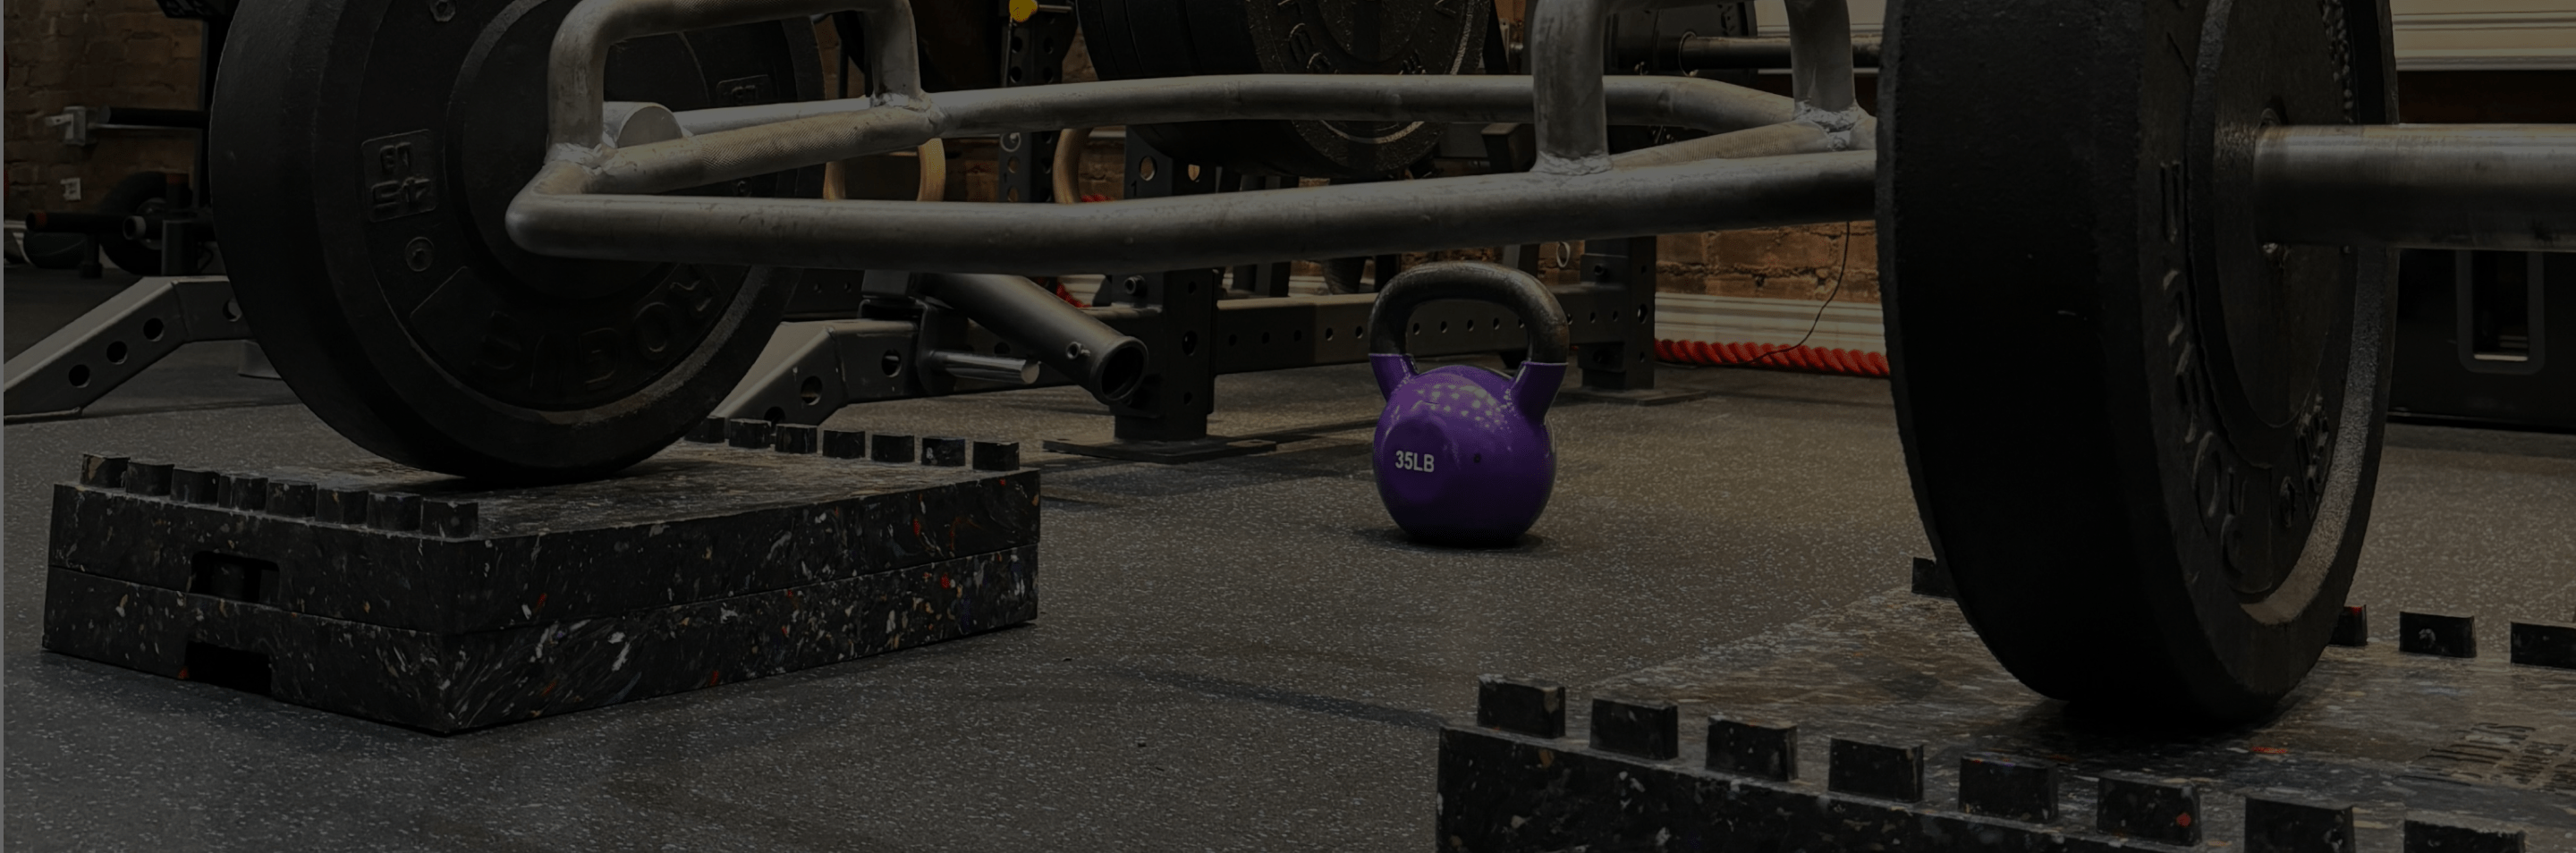 Kettle bell and exercise equipment